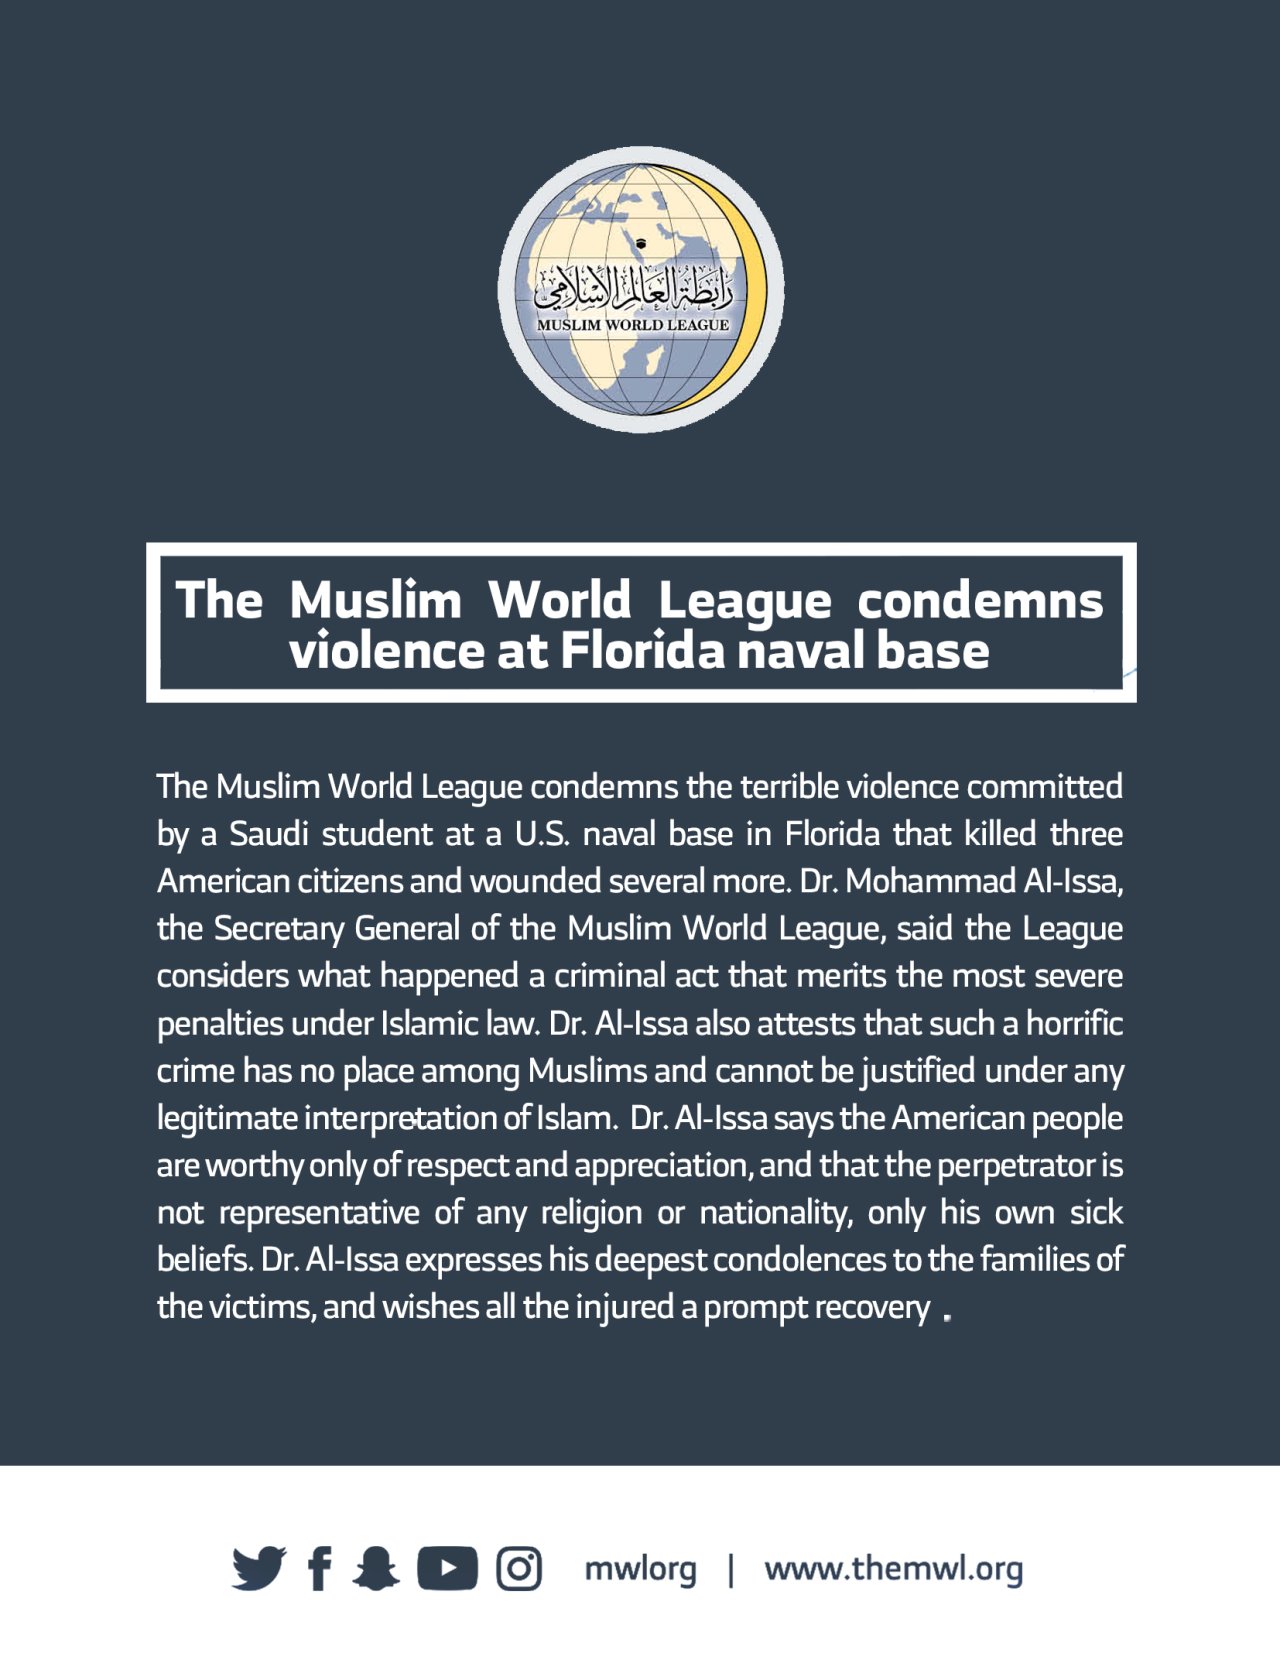 The Muslim World League condemns the terrible violence committed by a Saudi student at a U.S. naval base in Florida that killed three American citizens and wounded several more. Dr. Mohammad Al-Issa, the Secretary General of the Muslim World League, said the League considers what happened a criminal act that merits the most severe penalties under Islamic law. Dr. Al-Issa also attests that such a horrific crime has no place among Muslims and cannot be justified under any legitimate interpretation of Islam.  